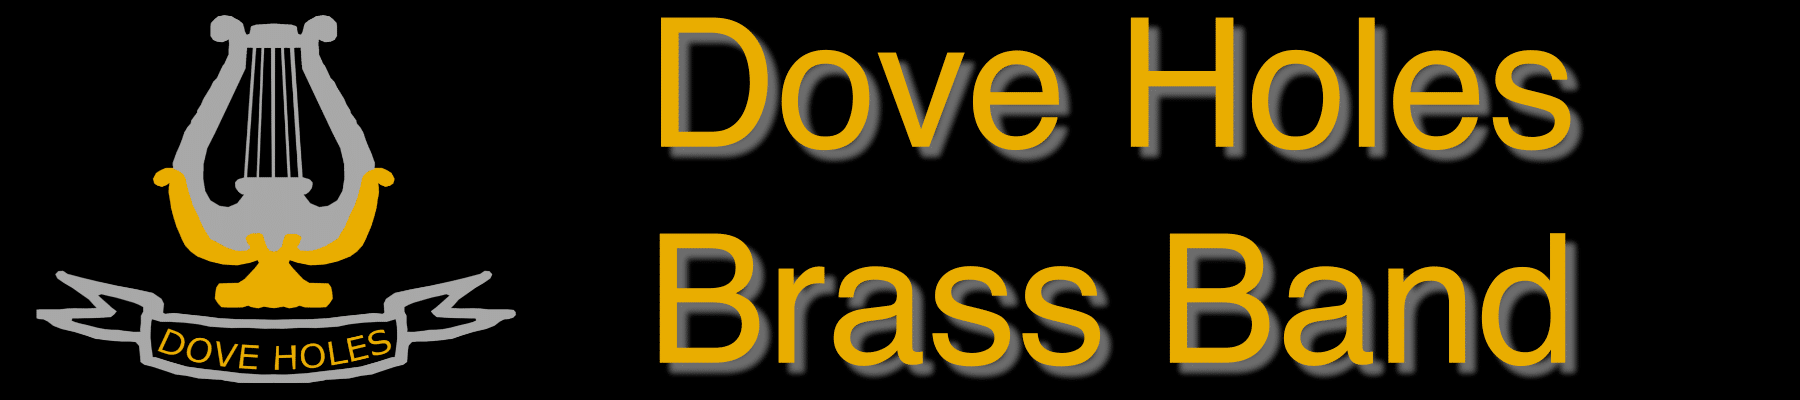 Dove Holes Brass Band